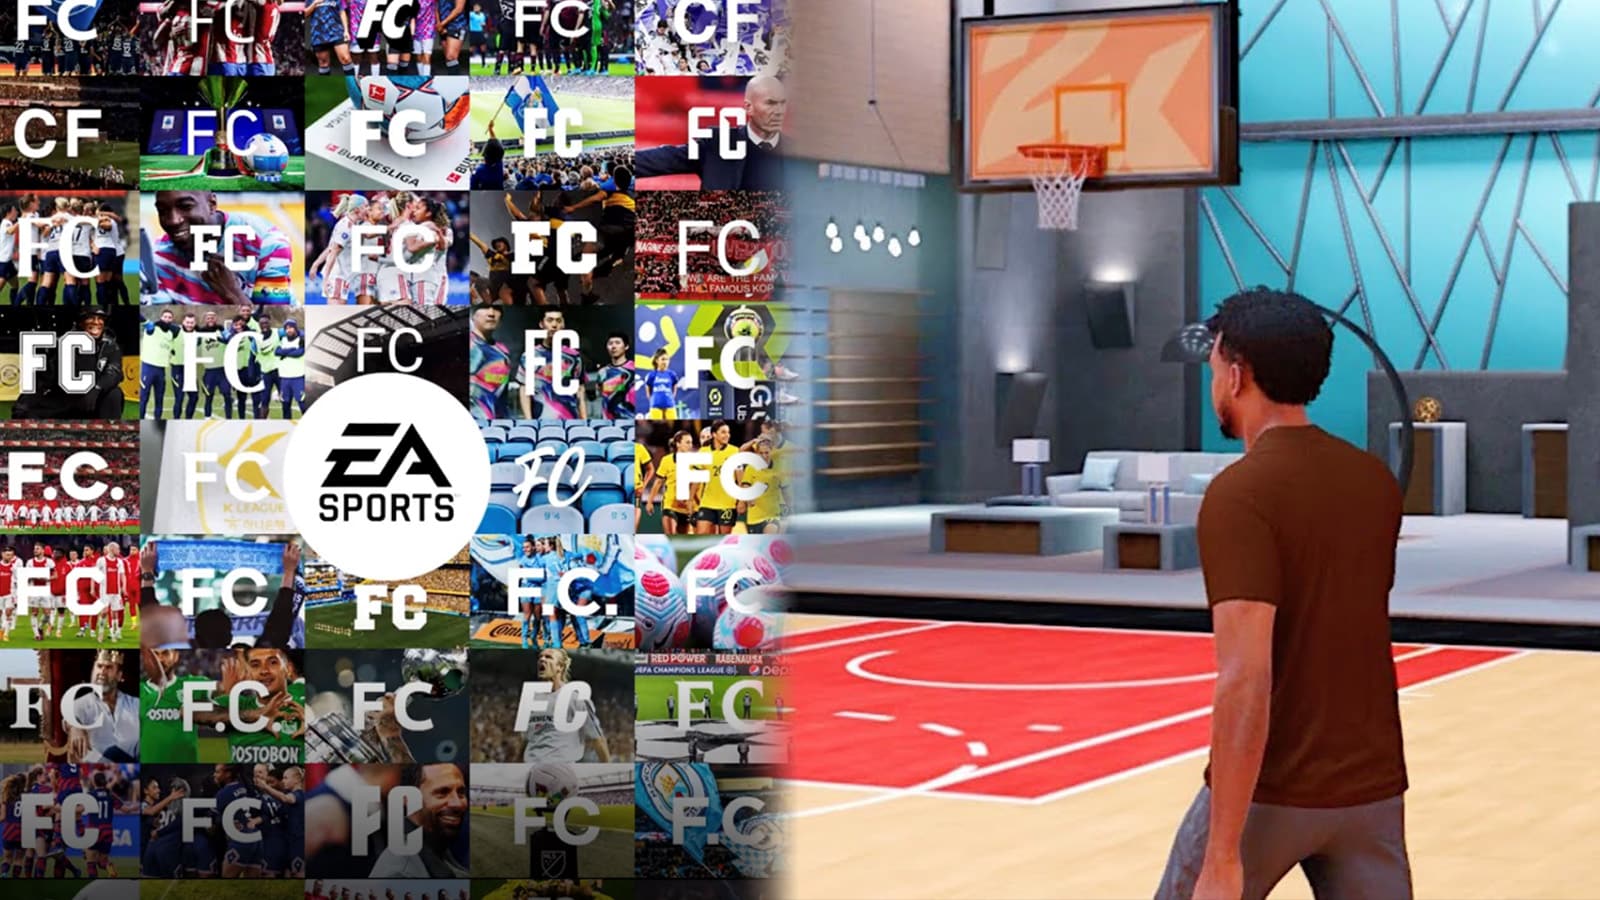 EA Sports FC 24 beta access brings the game to top of Twitch